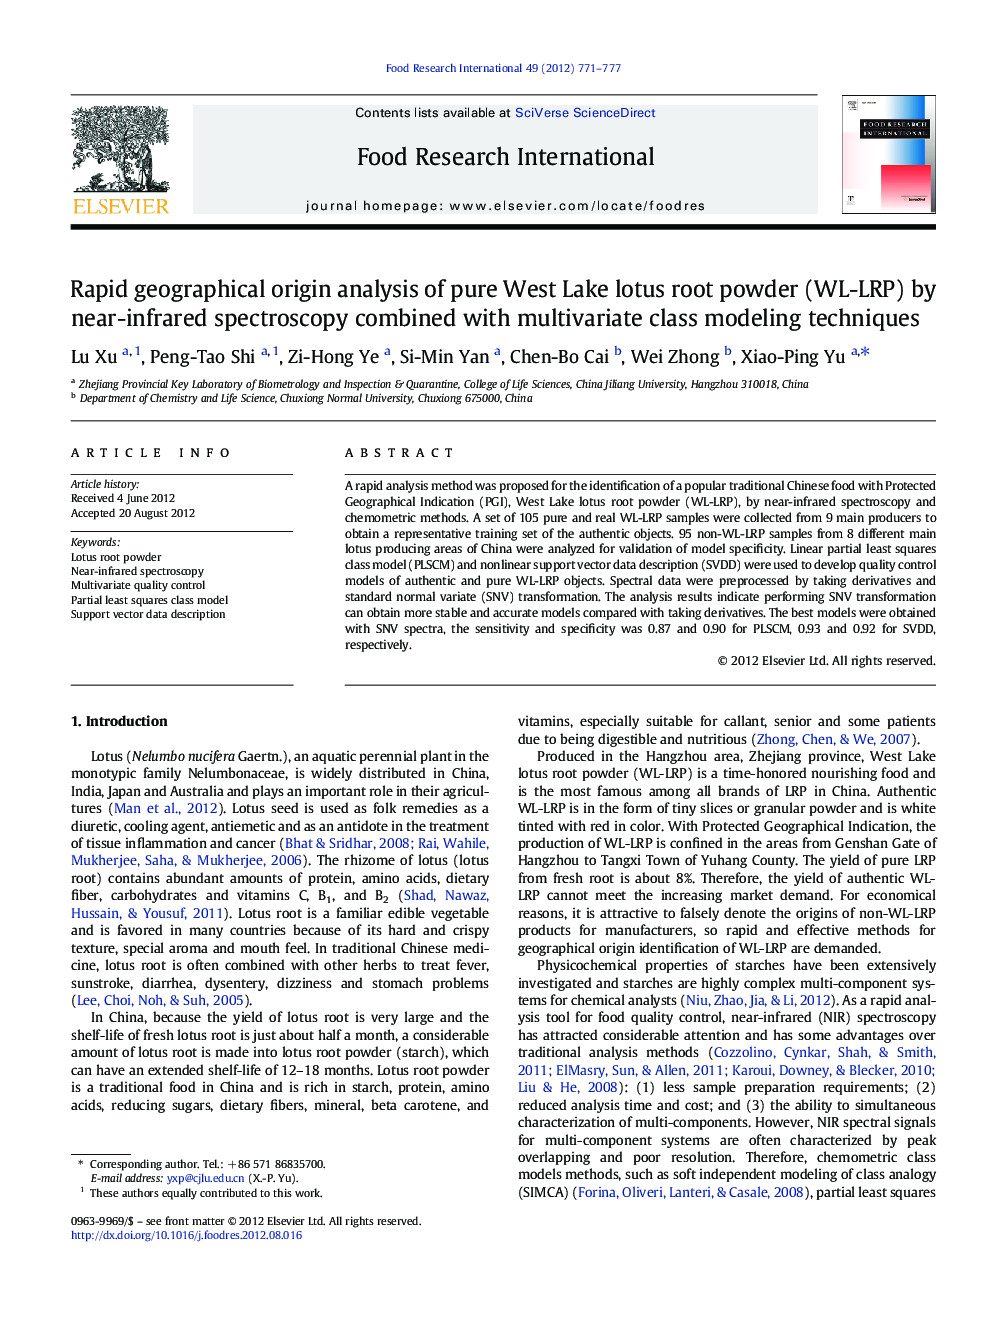 Rapid geographical origin analysis of pure West Lake lotus root powder (WL-LRP) by near-infrared spectroscopy combined with multivariate class modeling techniques